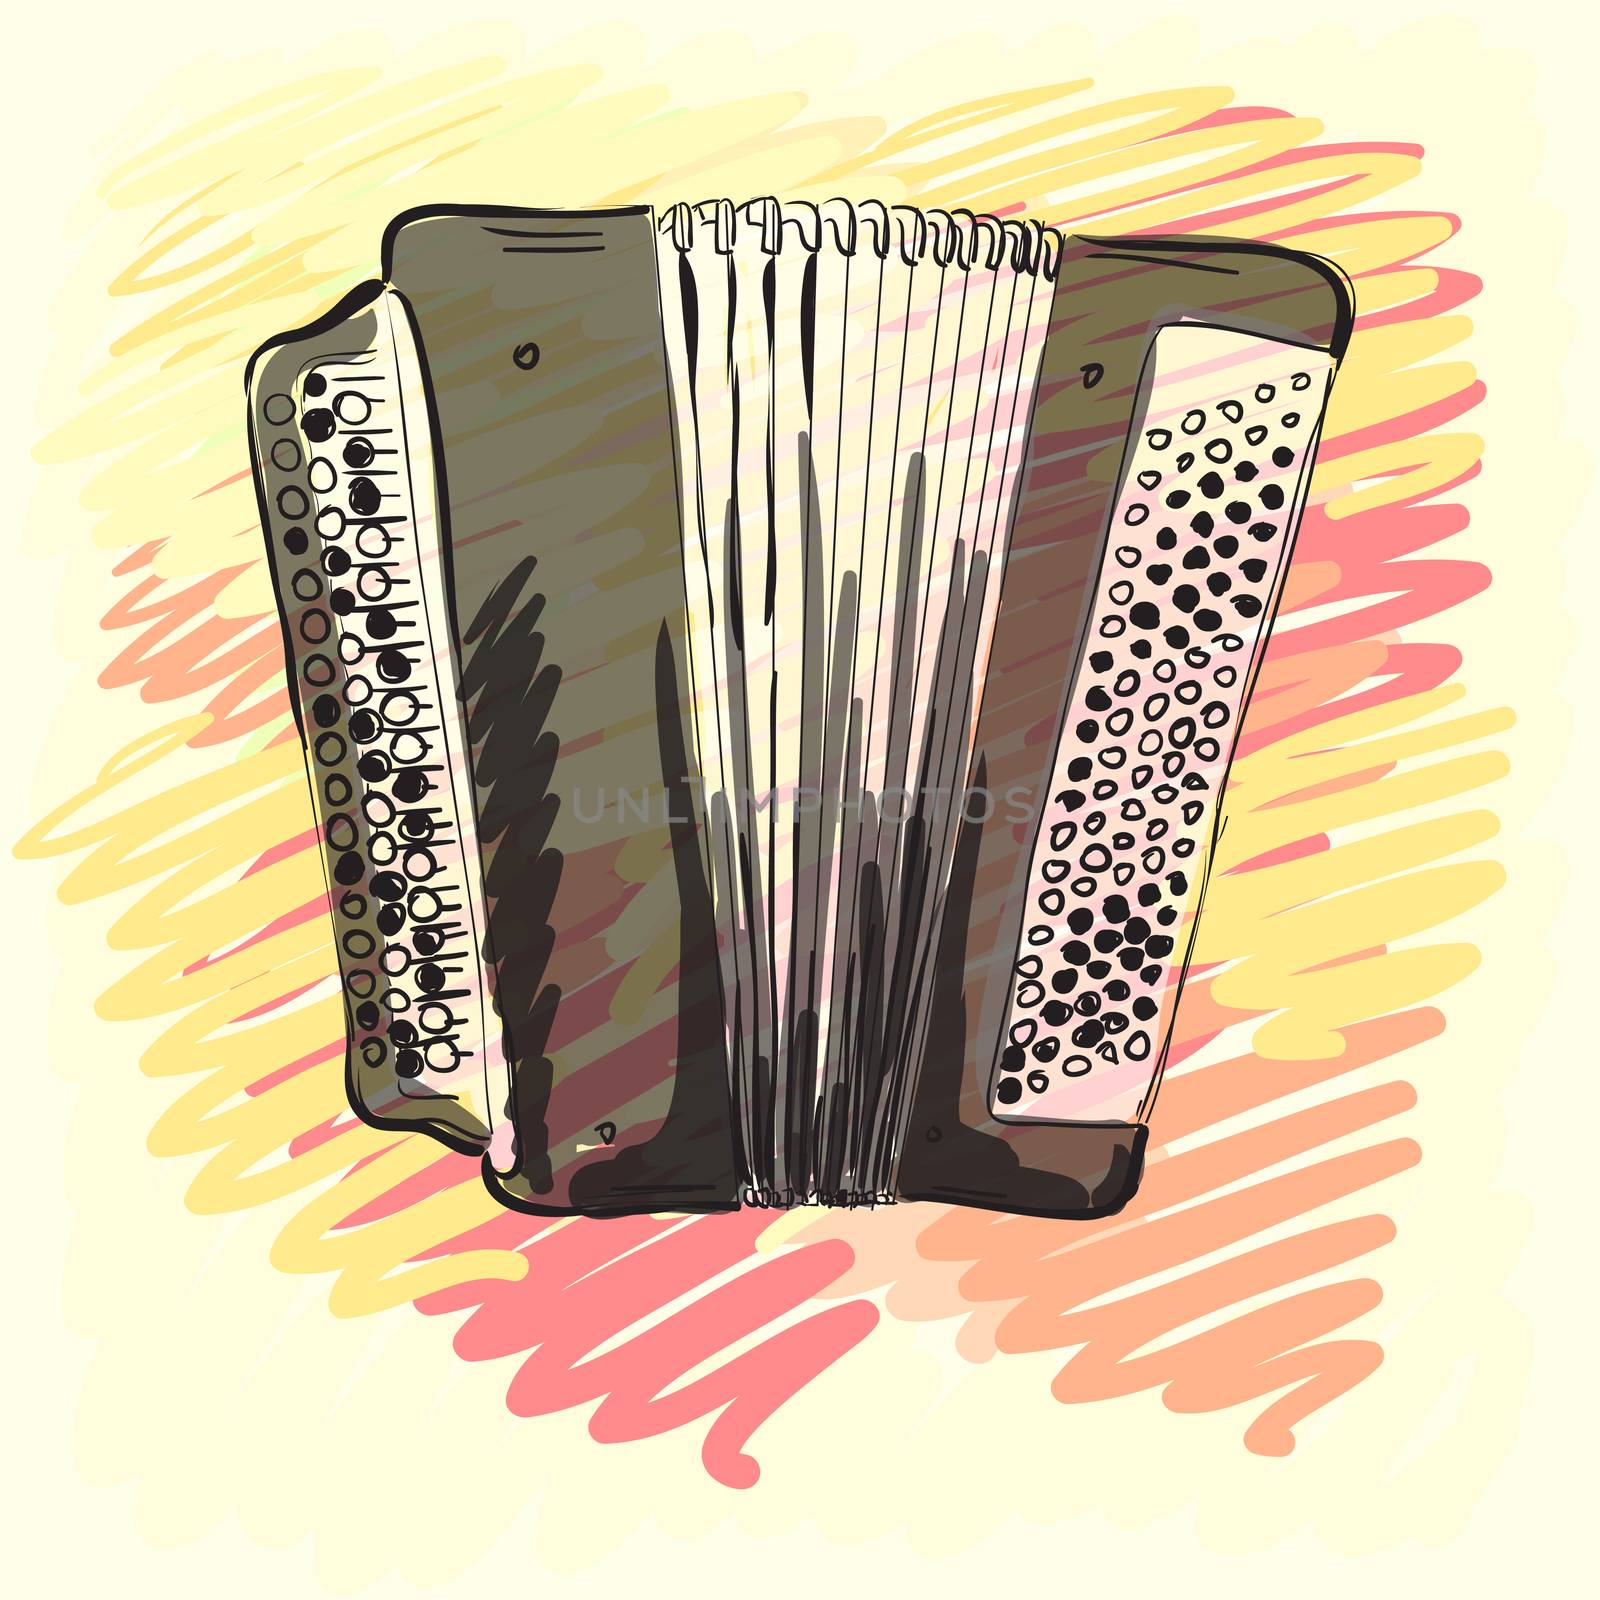 Musical instrument. Classical bayan accordion. Corporate identity sketch. illustration